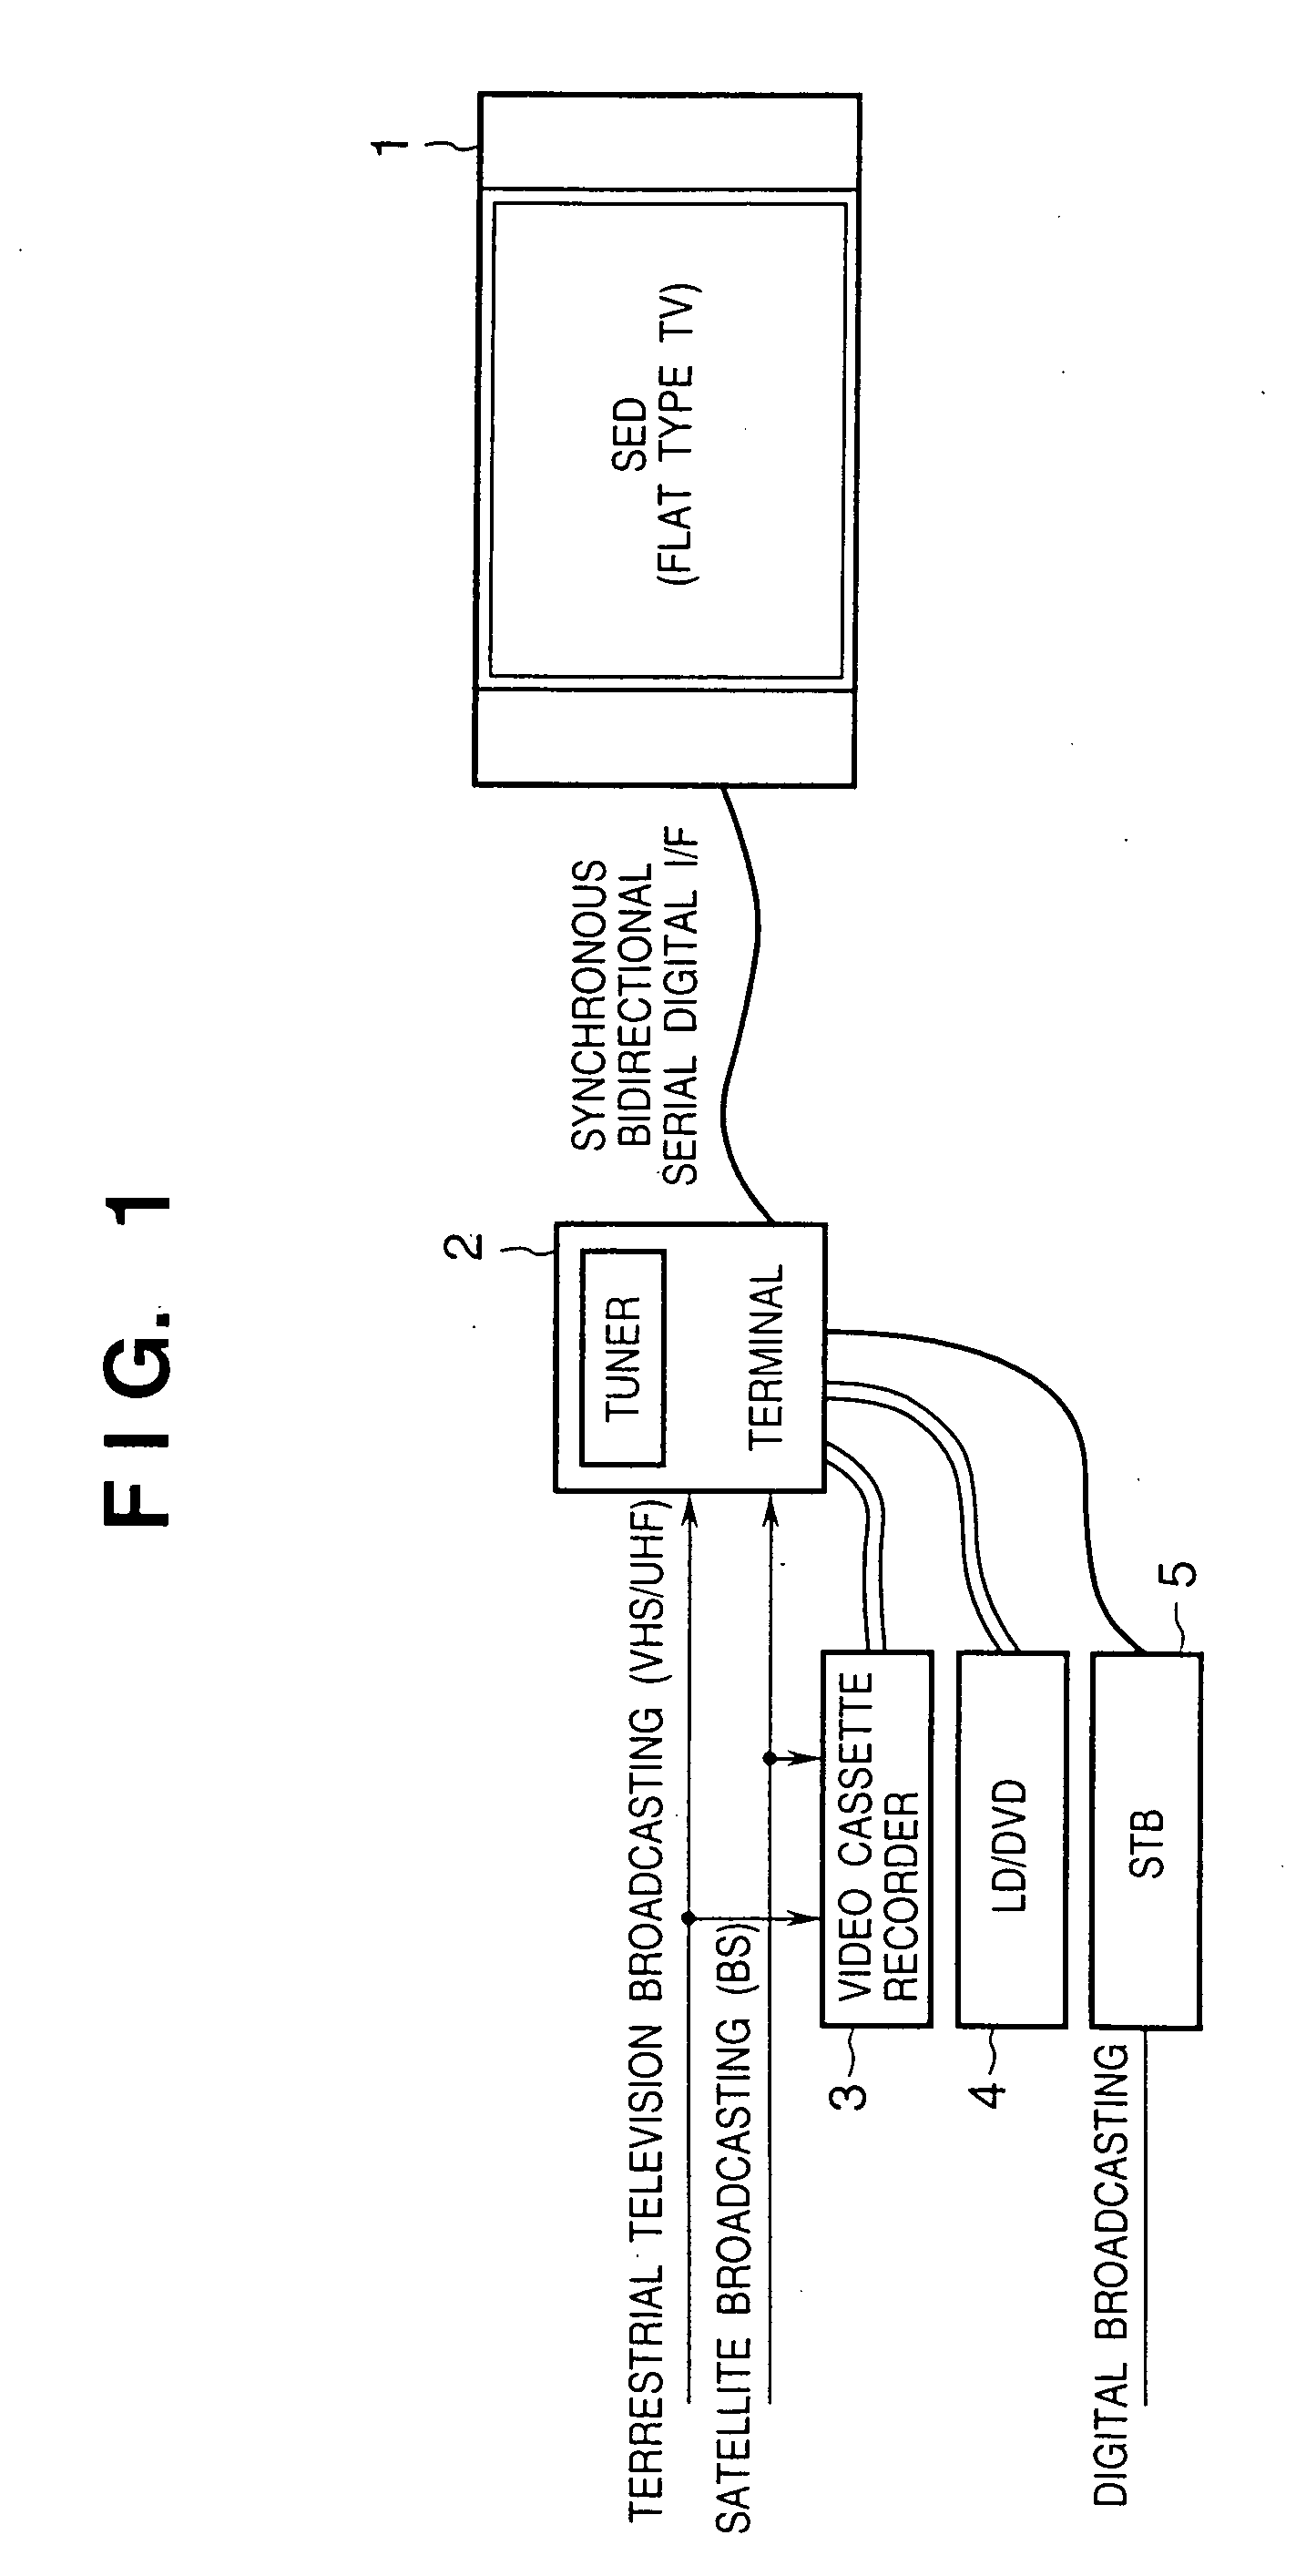 Image display control system and image display system control method